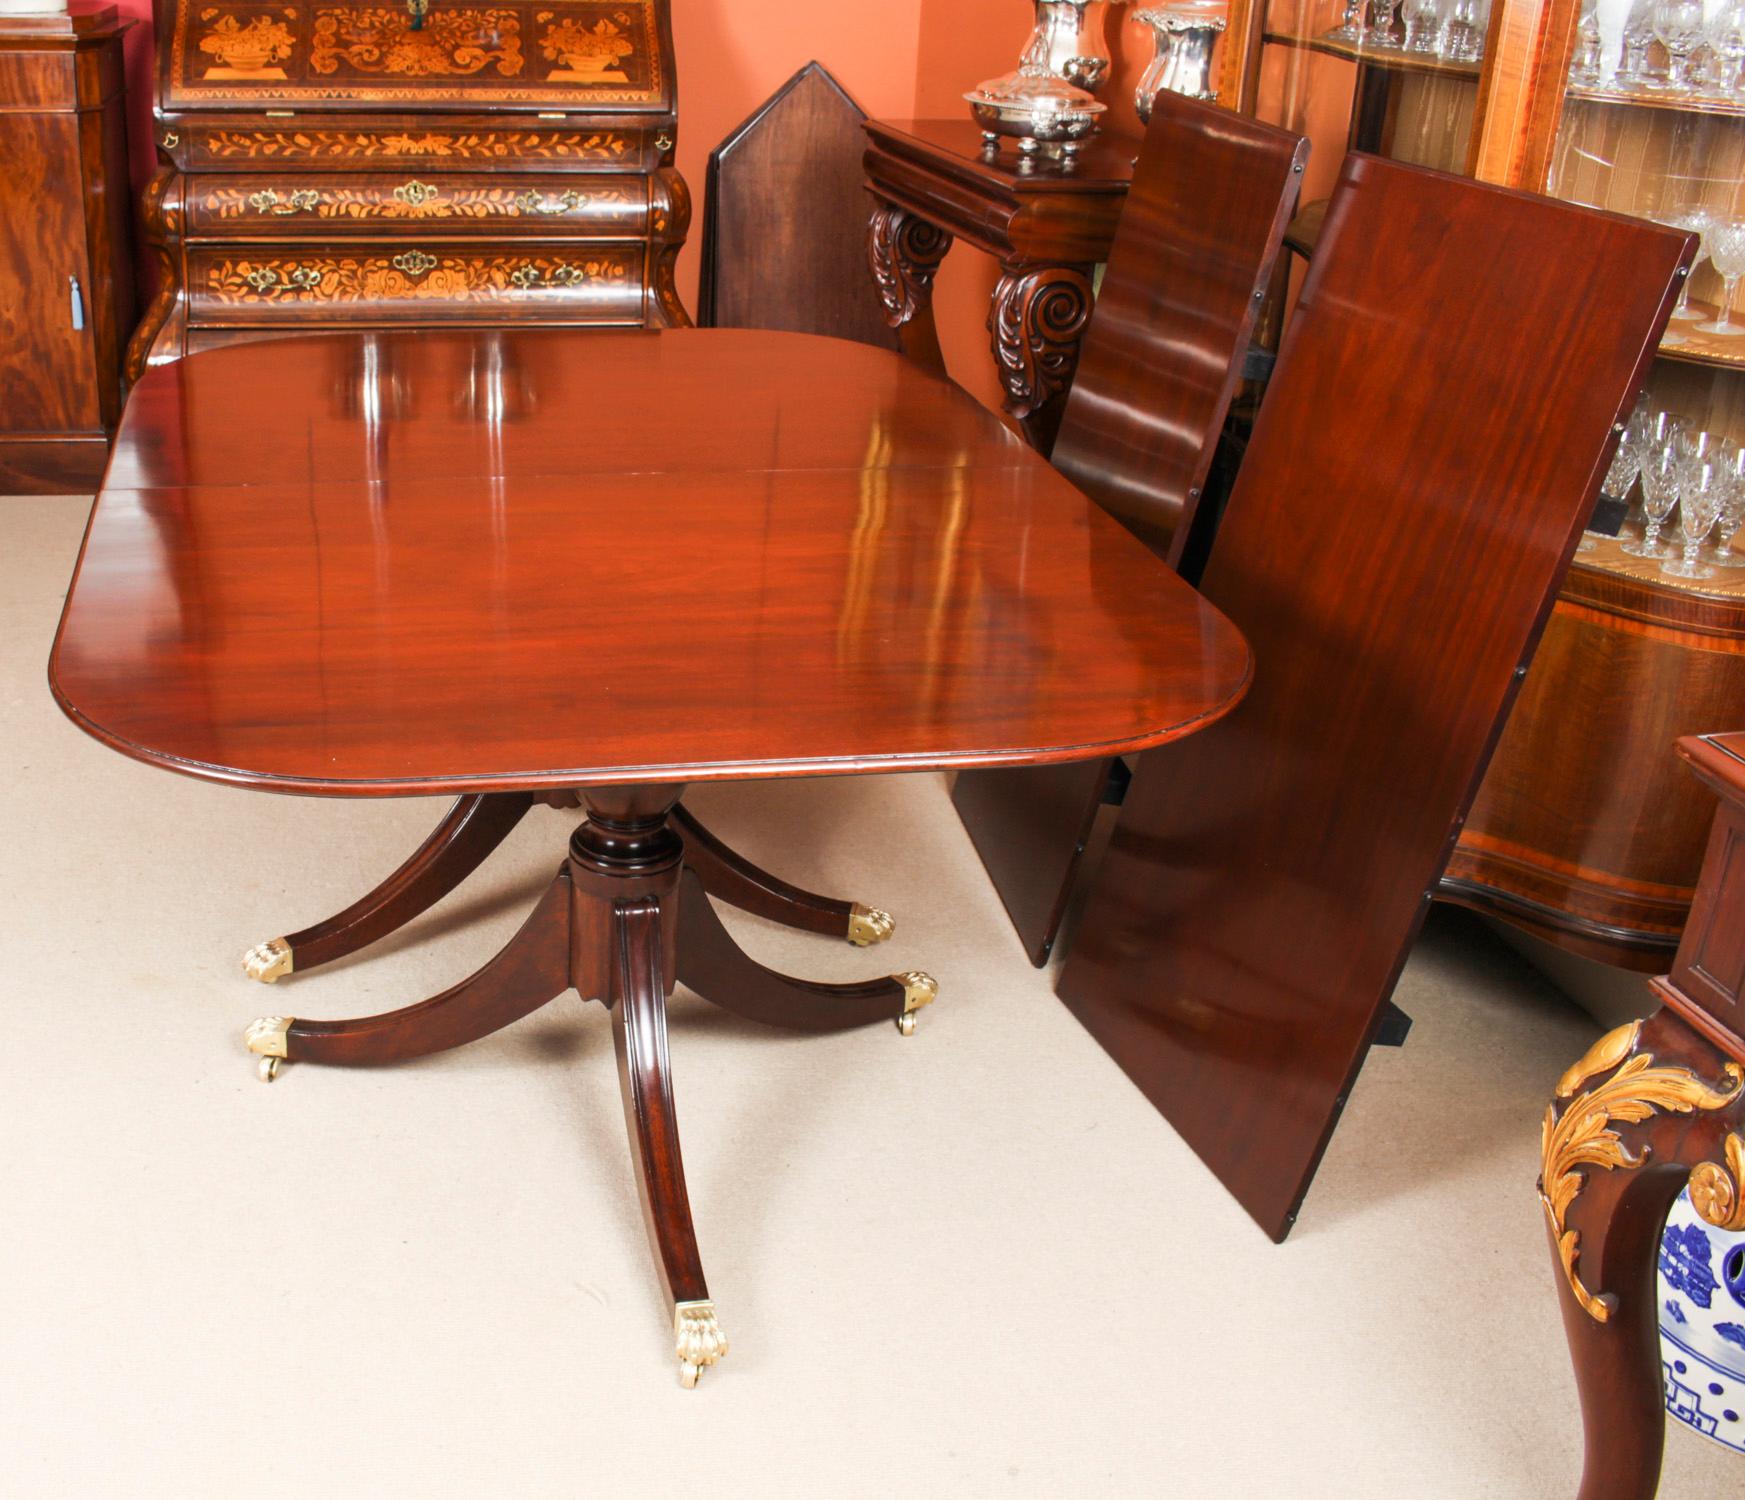 Mahogany Antique George III Twin Pillar Dining Table & 8 Chairs 18th C